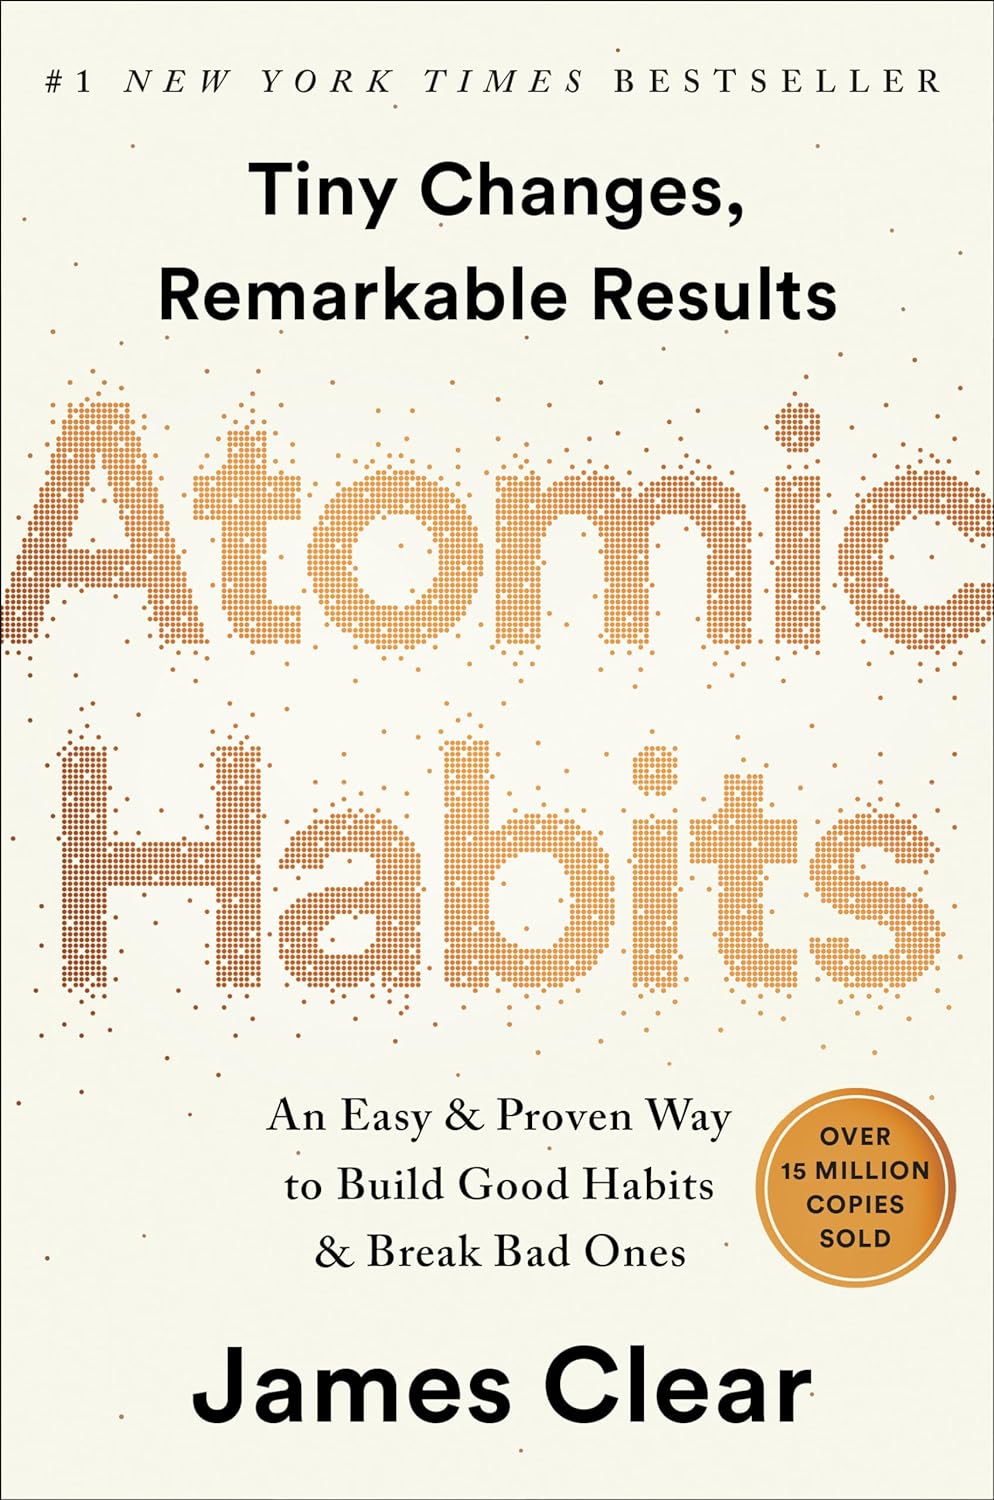 Atomic Habits by James Clear - Motivational Books for the New Year